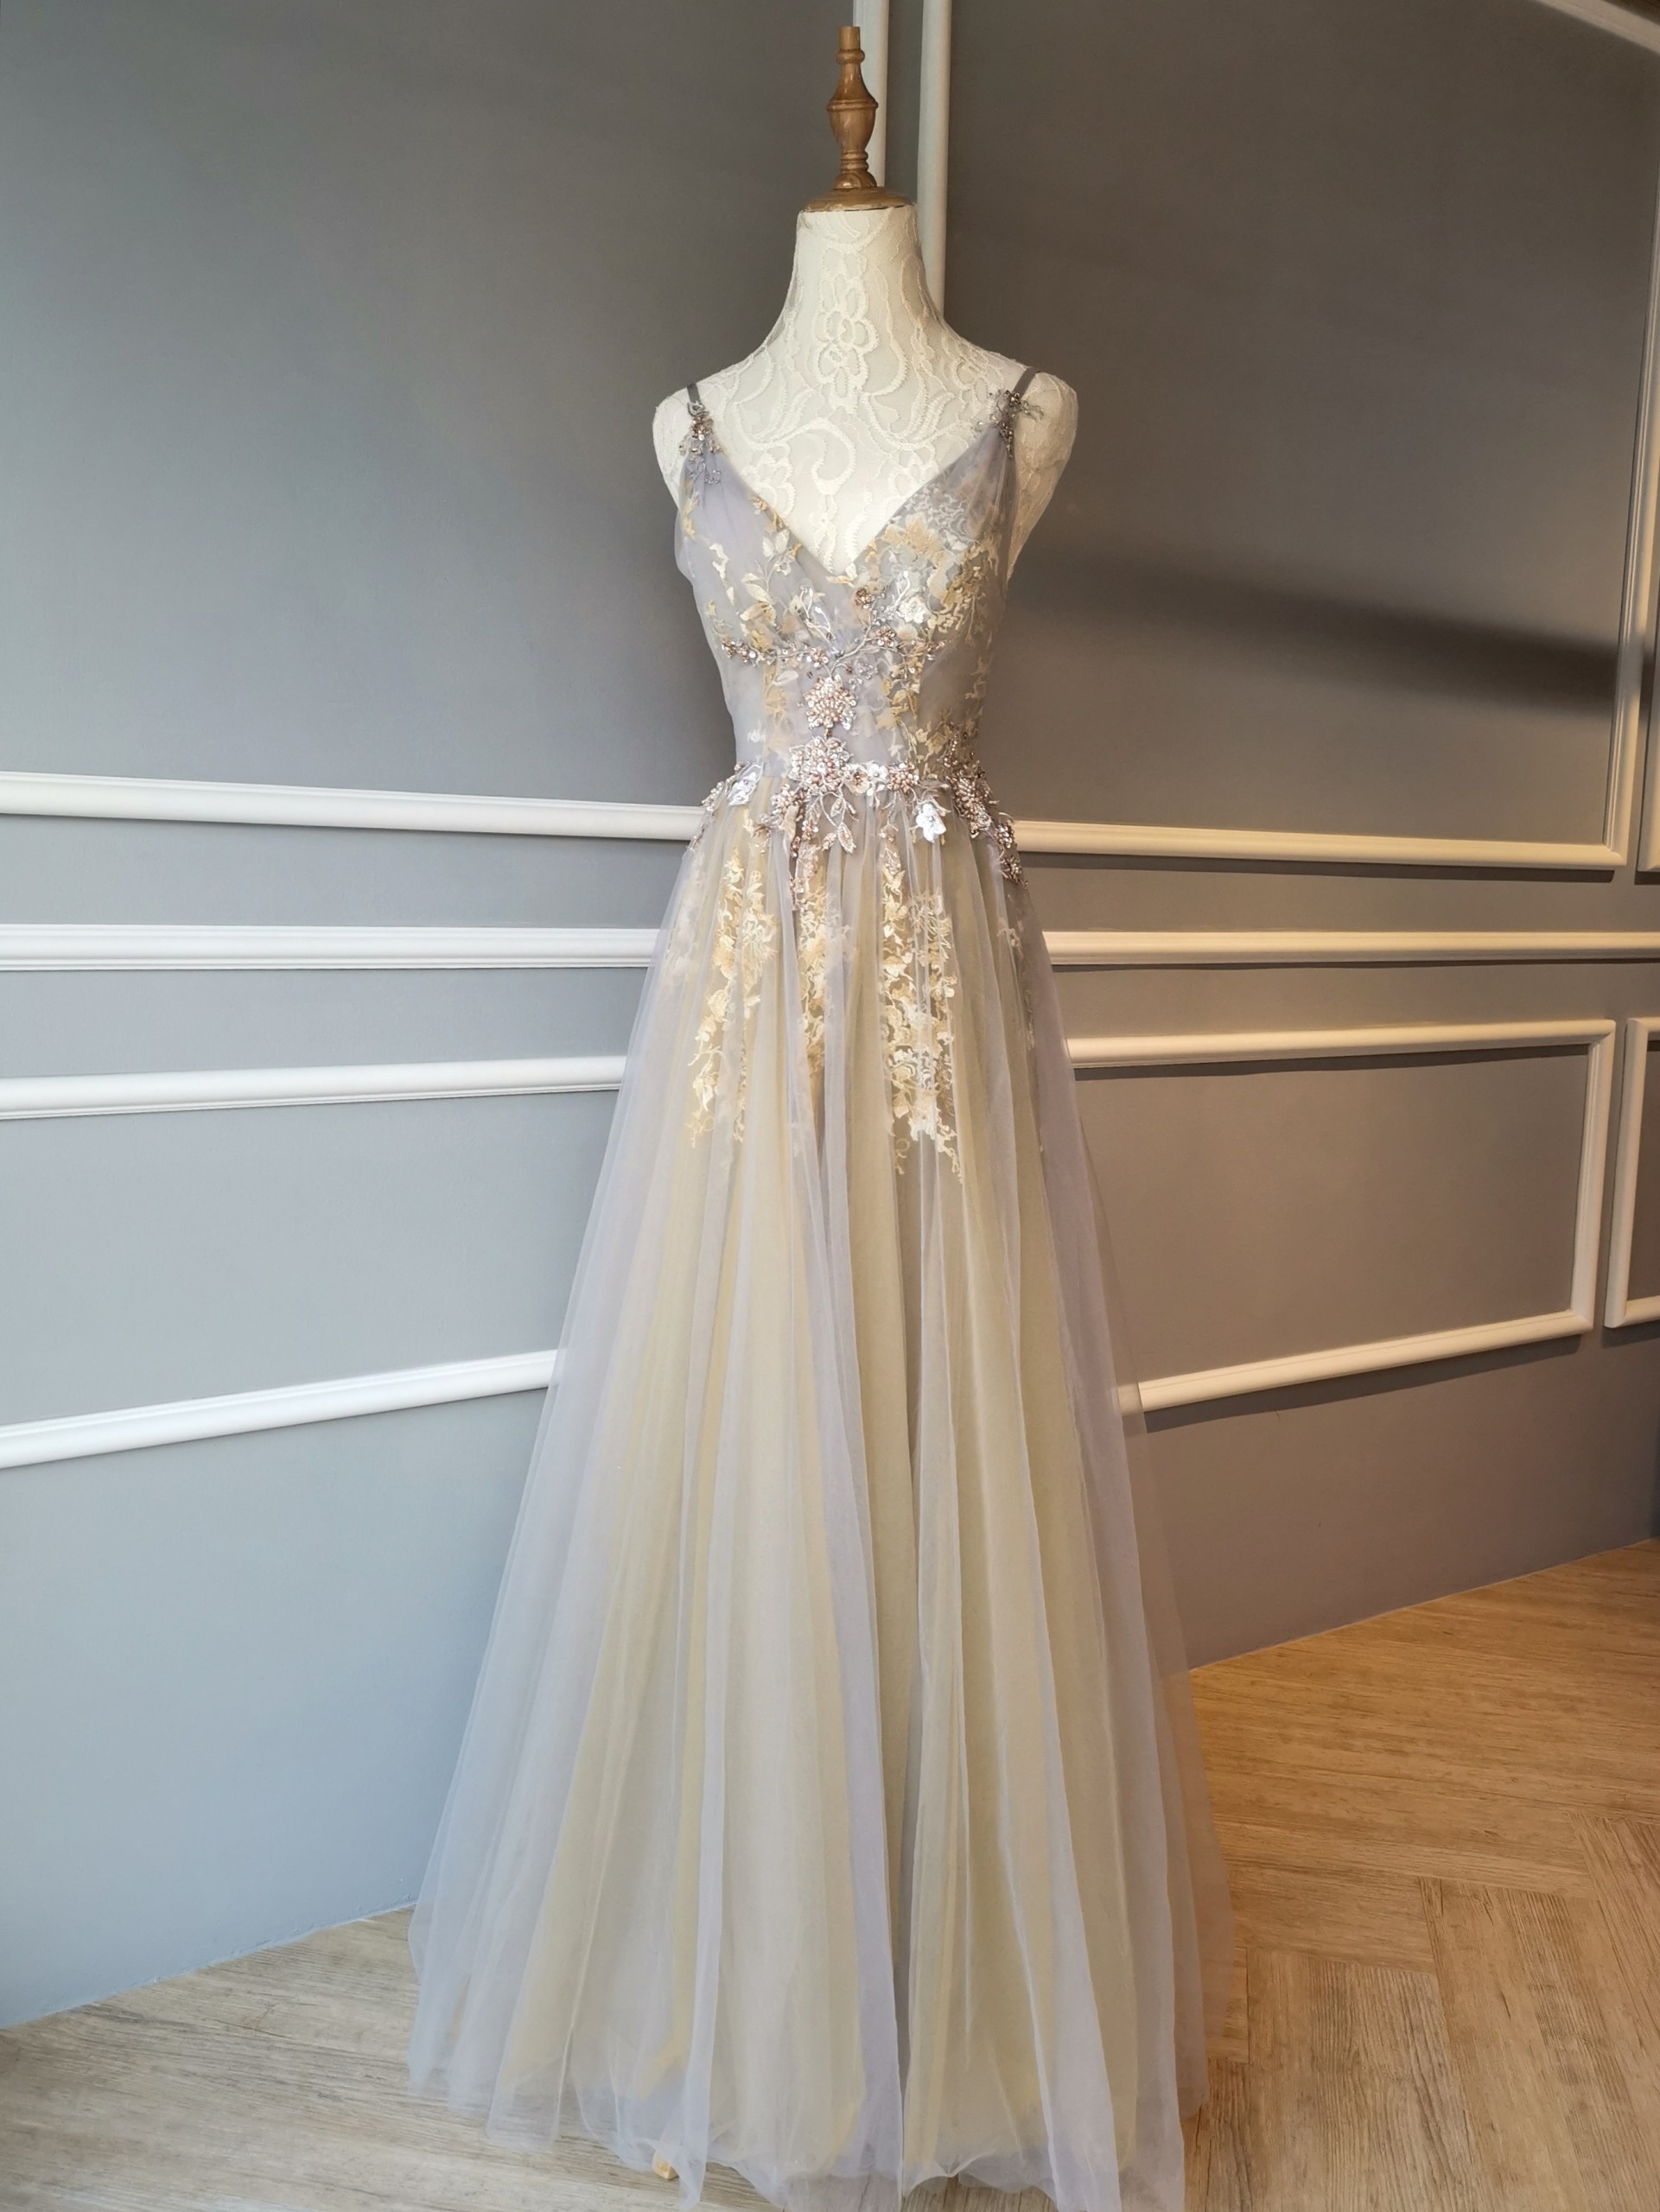 Nora Gown - Vogue Lease